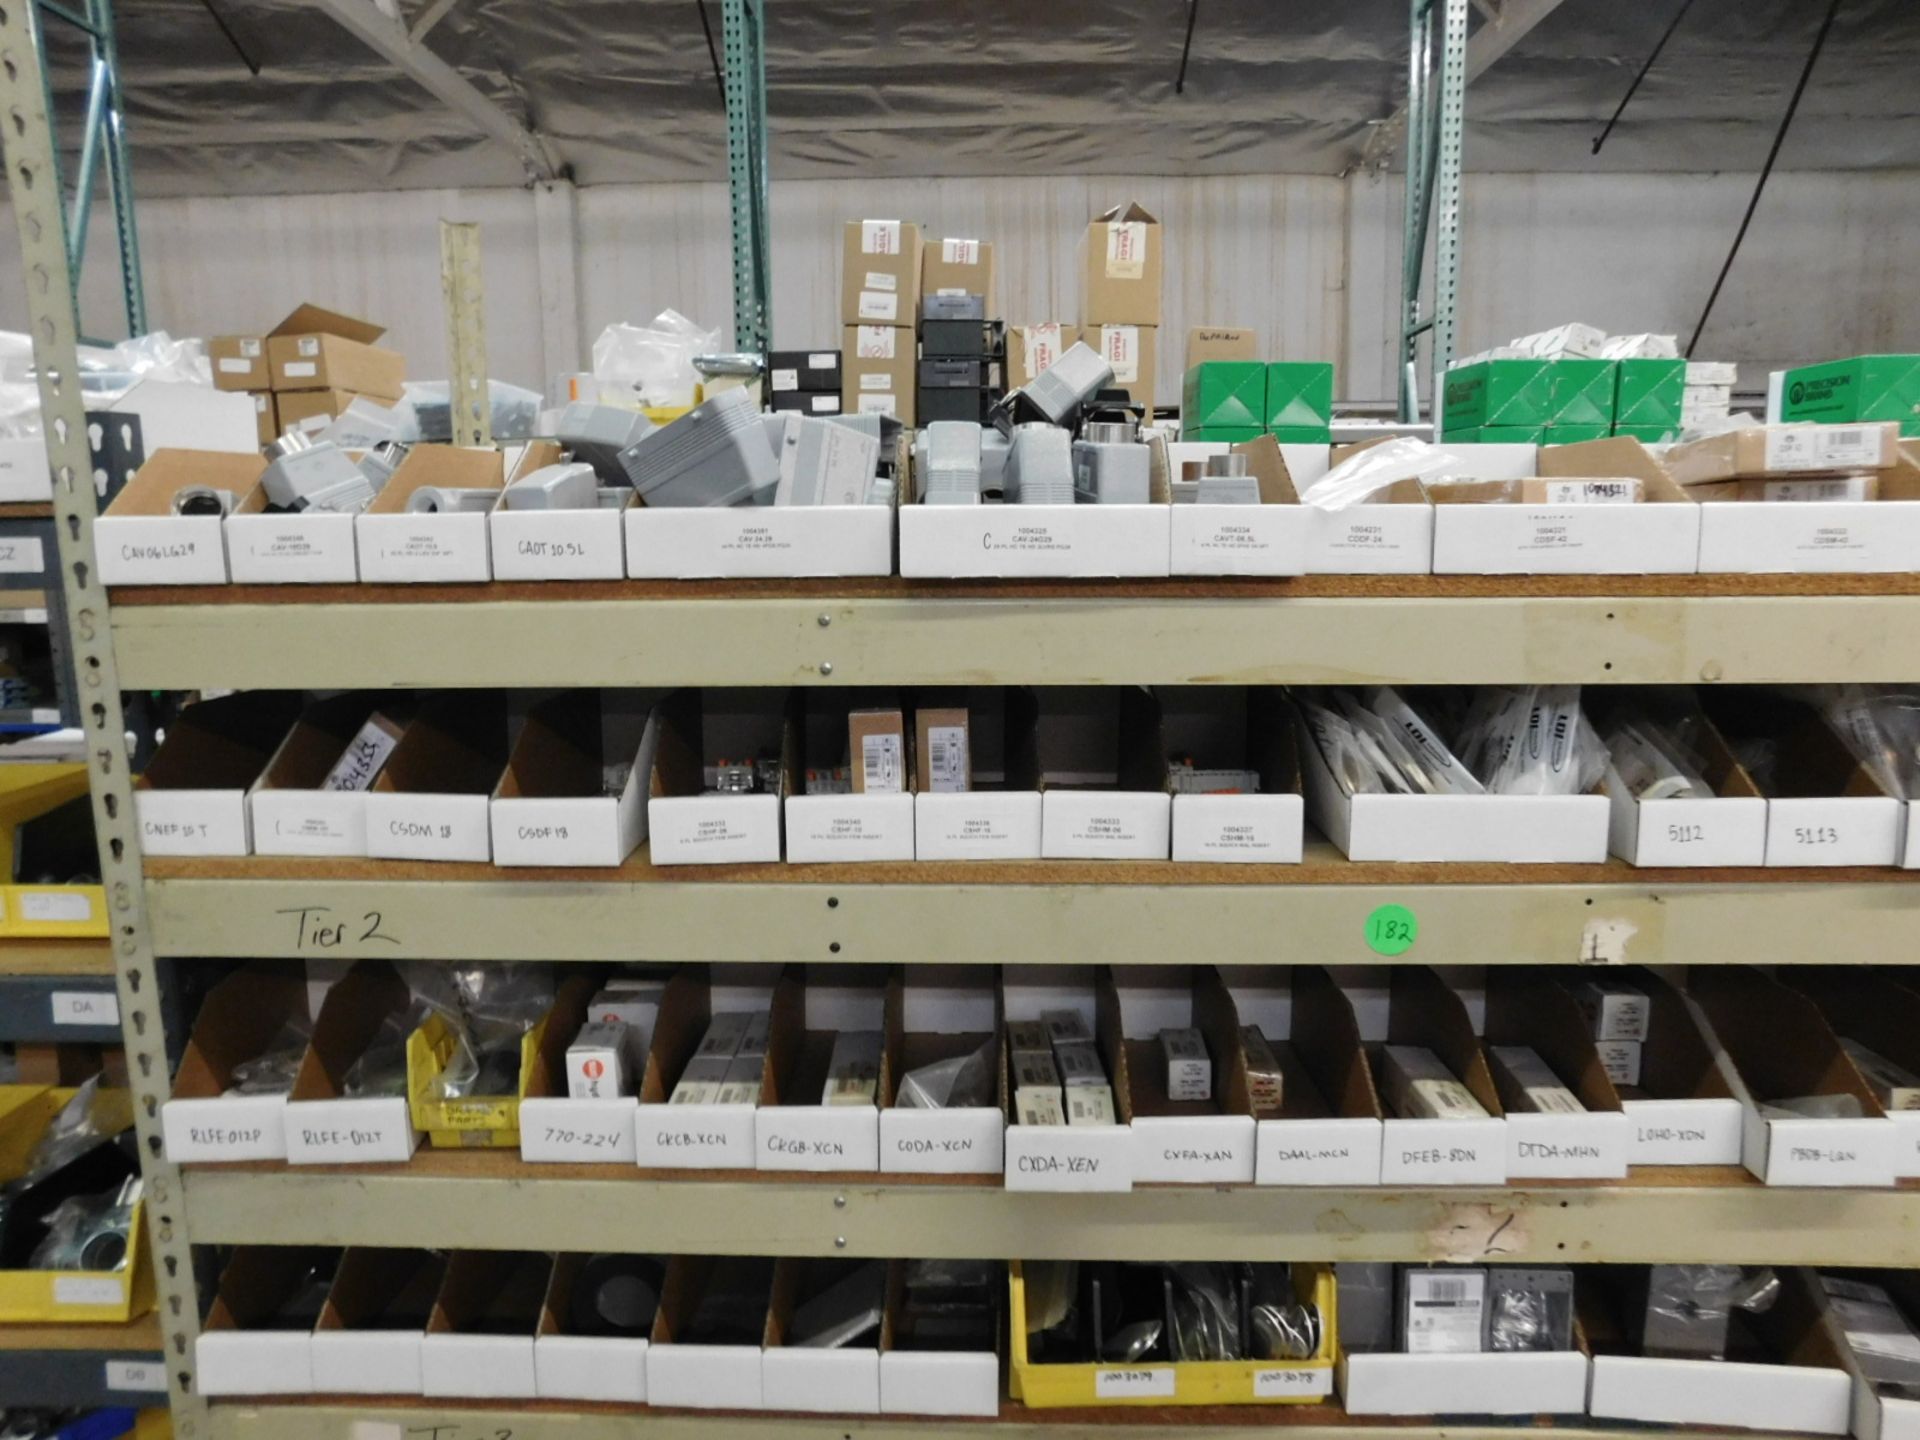 LOT - 12' OF SHELF ISLAND, W/ CONTENTS OF ELECTRICAL CONDUIT BOXES AND FITTINGS, ALLEN-BRADLEY & - Image 5 of 18